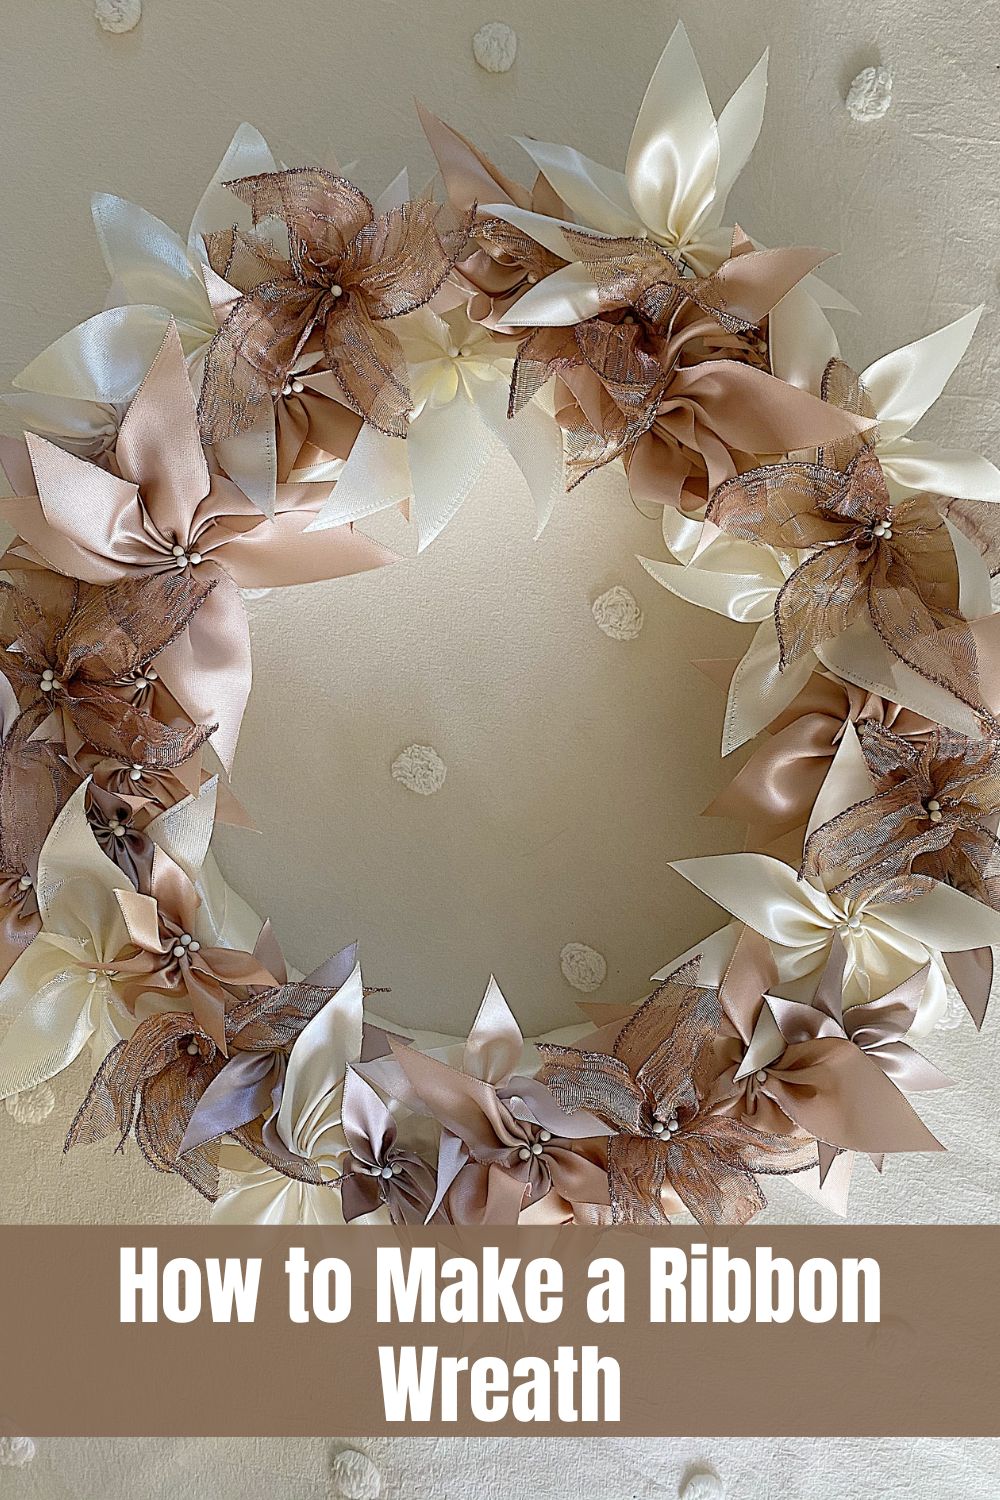 How to Make a Ribbon Wreath - MY 100 YEAR OLD HOME